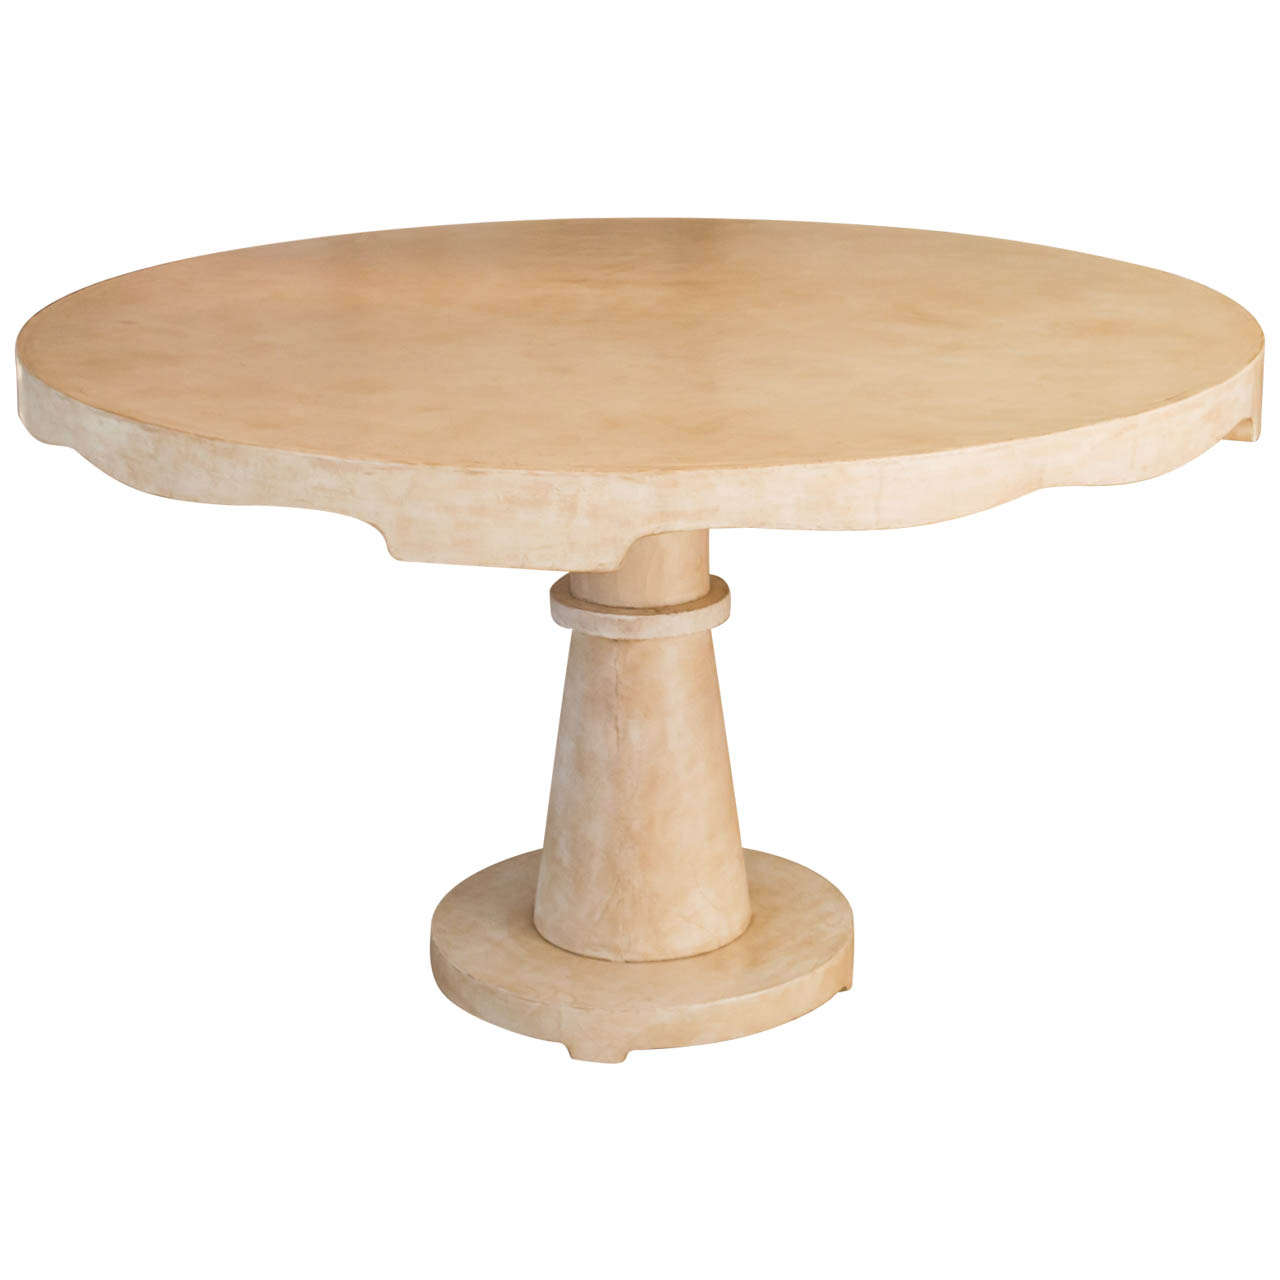 Beautiful Candace Barnes Moroccan Inspired Round Center Table